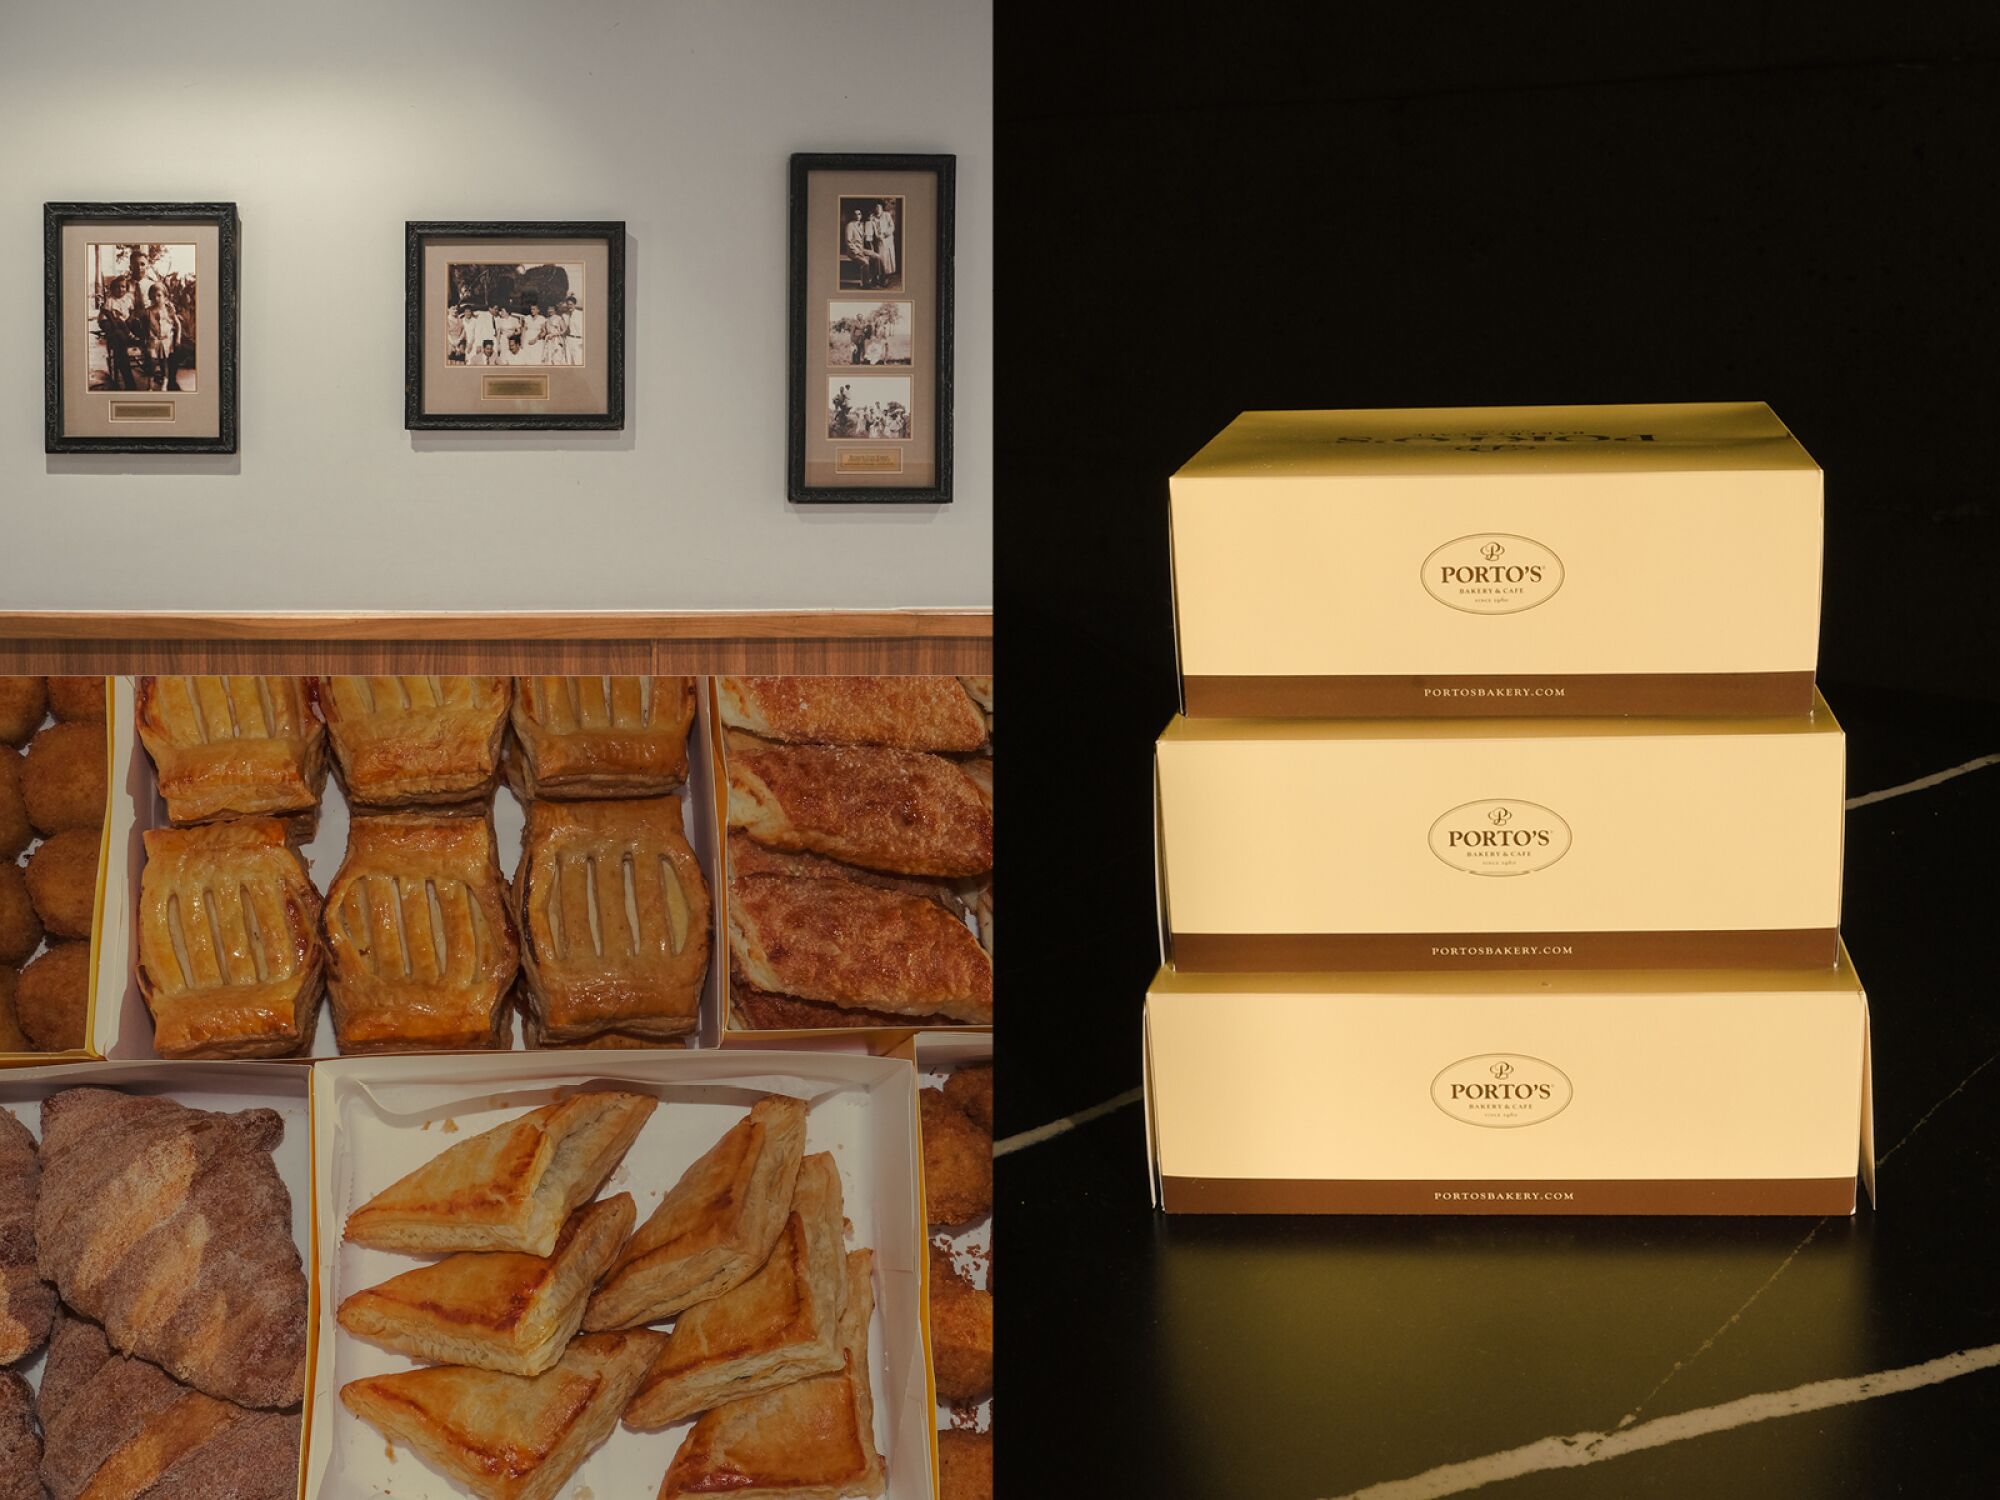 Historical images framed on a wall over a bakery case filled with pastries; a stack of three Porto's boxes.